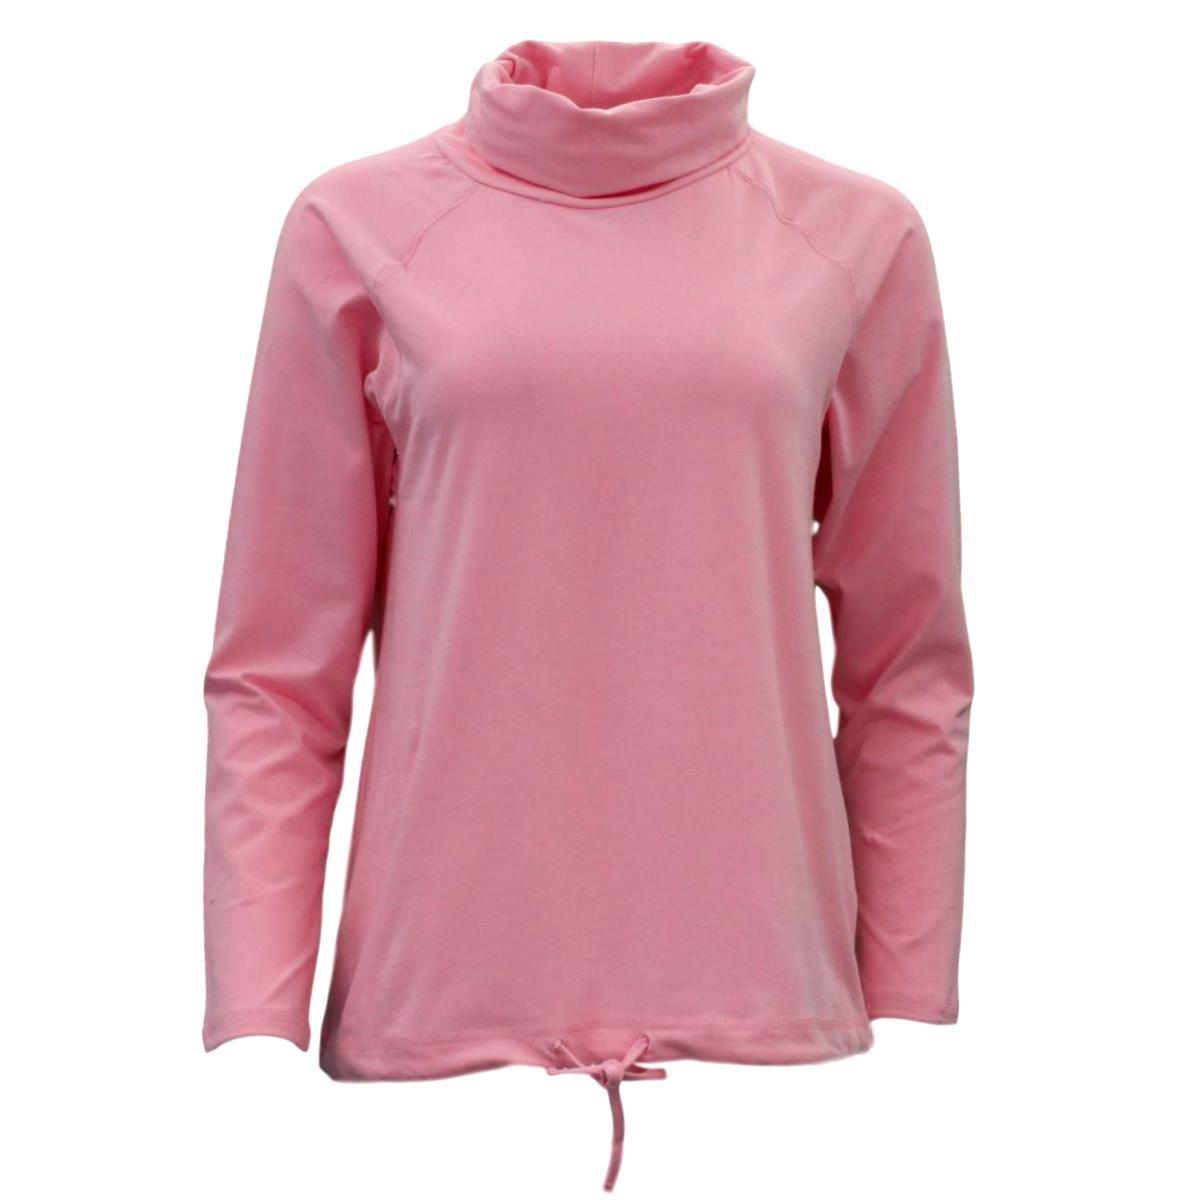 Women's Cotton Long Sleeve Turtle Neck Skivvy Top High Neck w ...